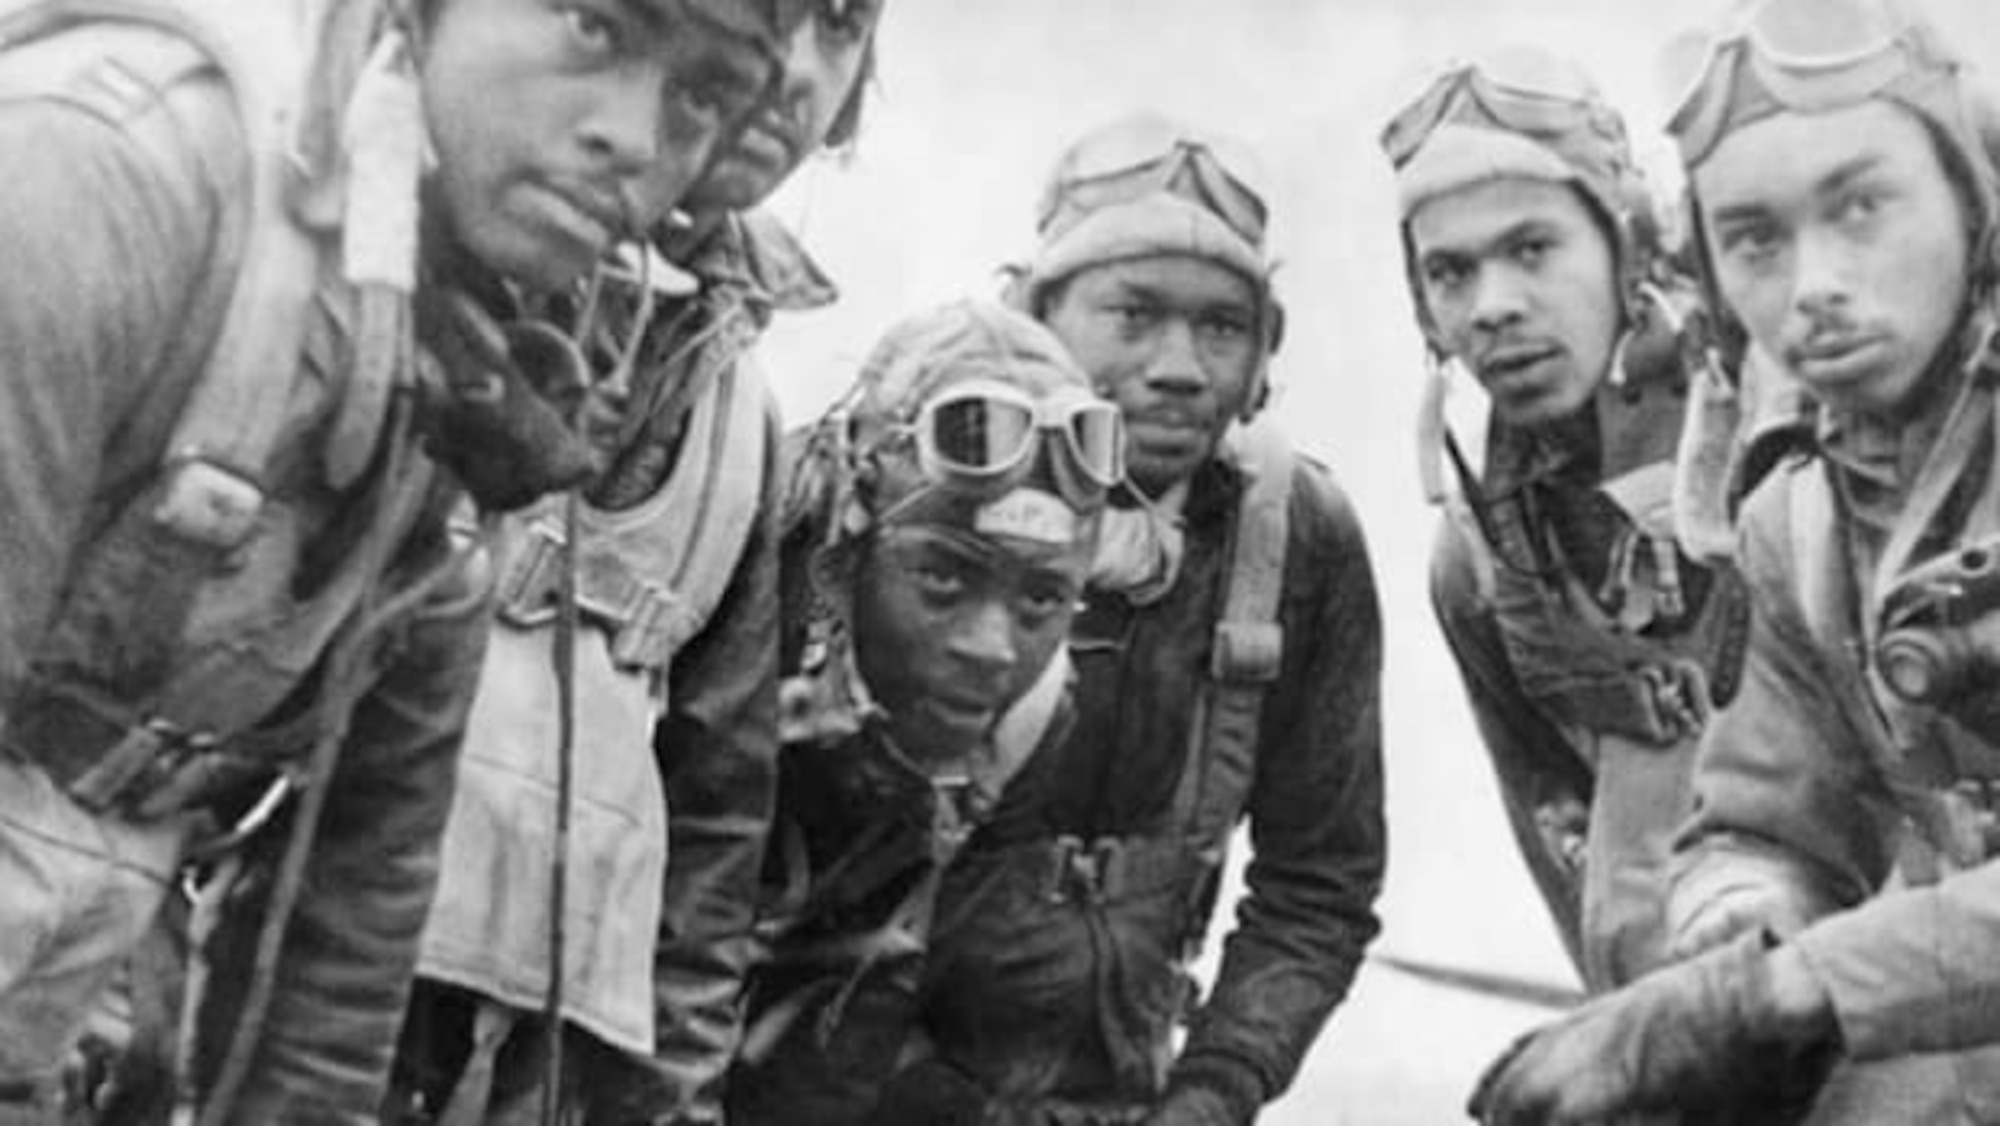 A “selfie” of Tuskegee Airmen on duty. From the History.com